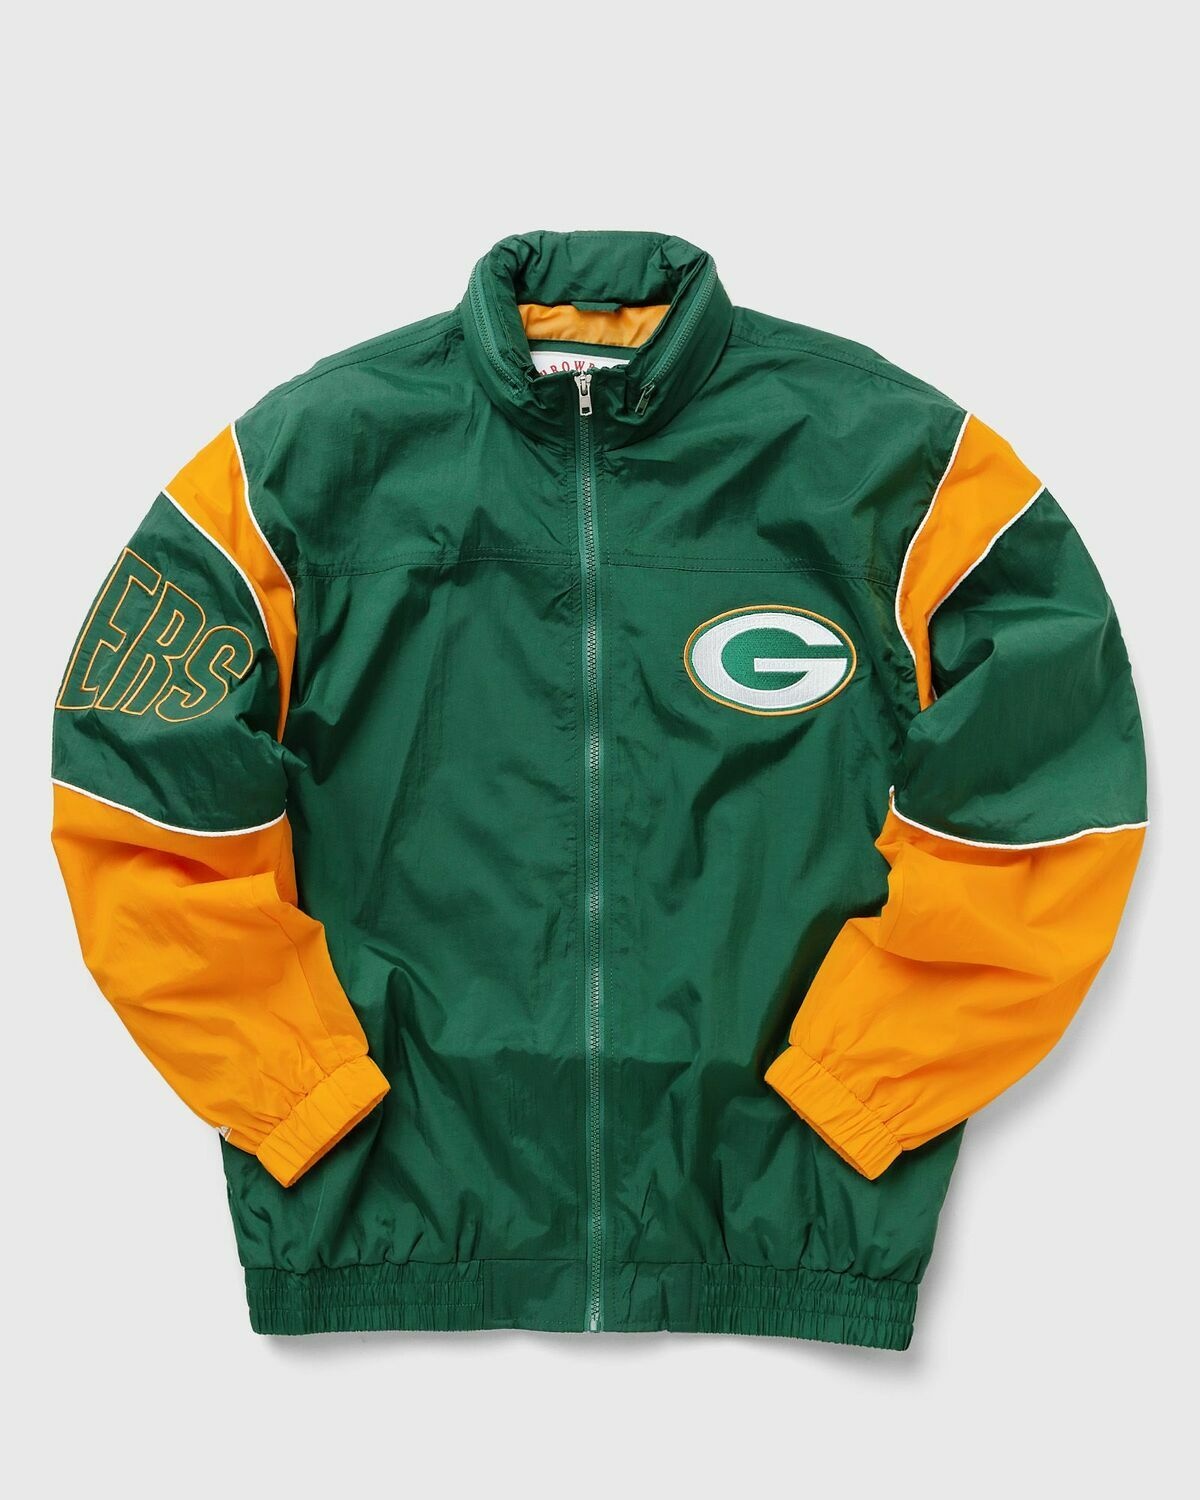 Mitchell & Ness Greenbay Packers   Sideline Jacket Green - Mens - Team Jackets/Track Jackets